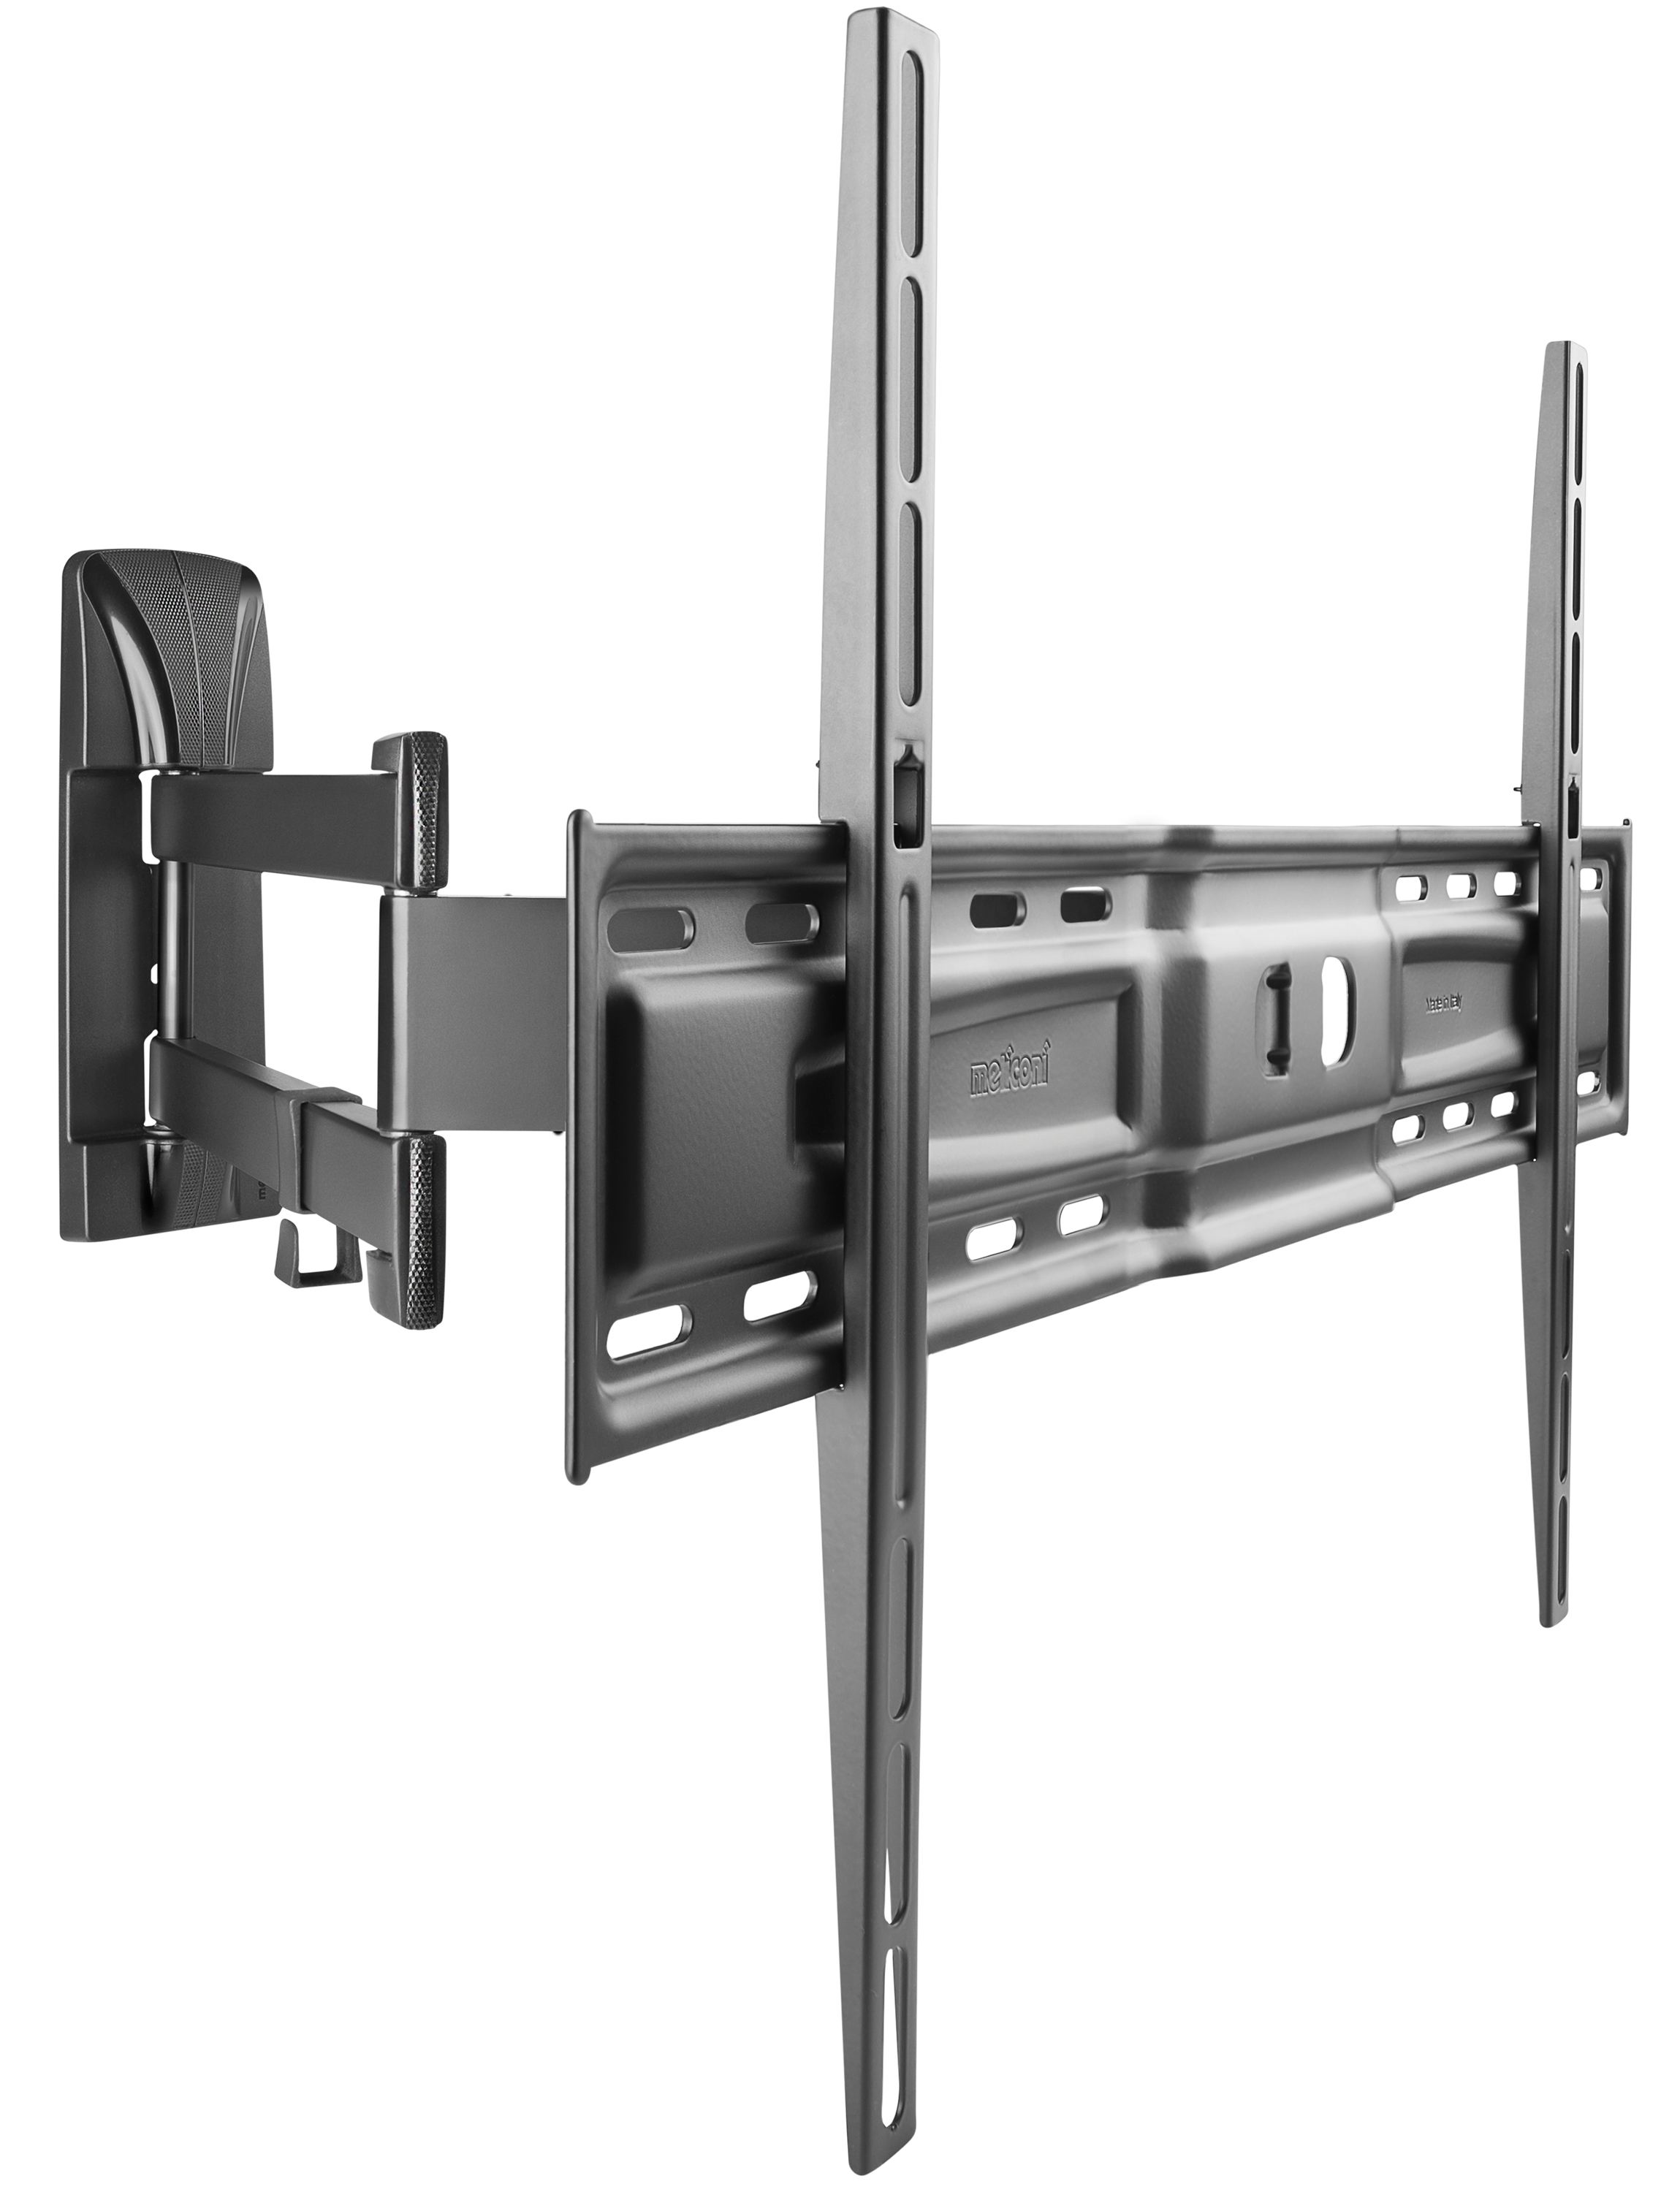 Slimstyle 600 SDR, wall bracket rotatable double arm for 50-80 inch tv, bla